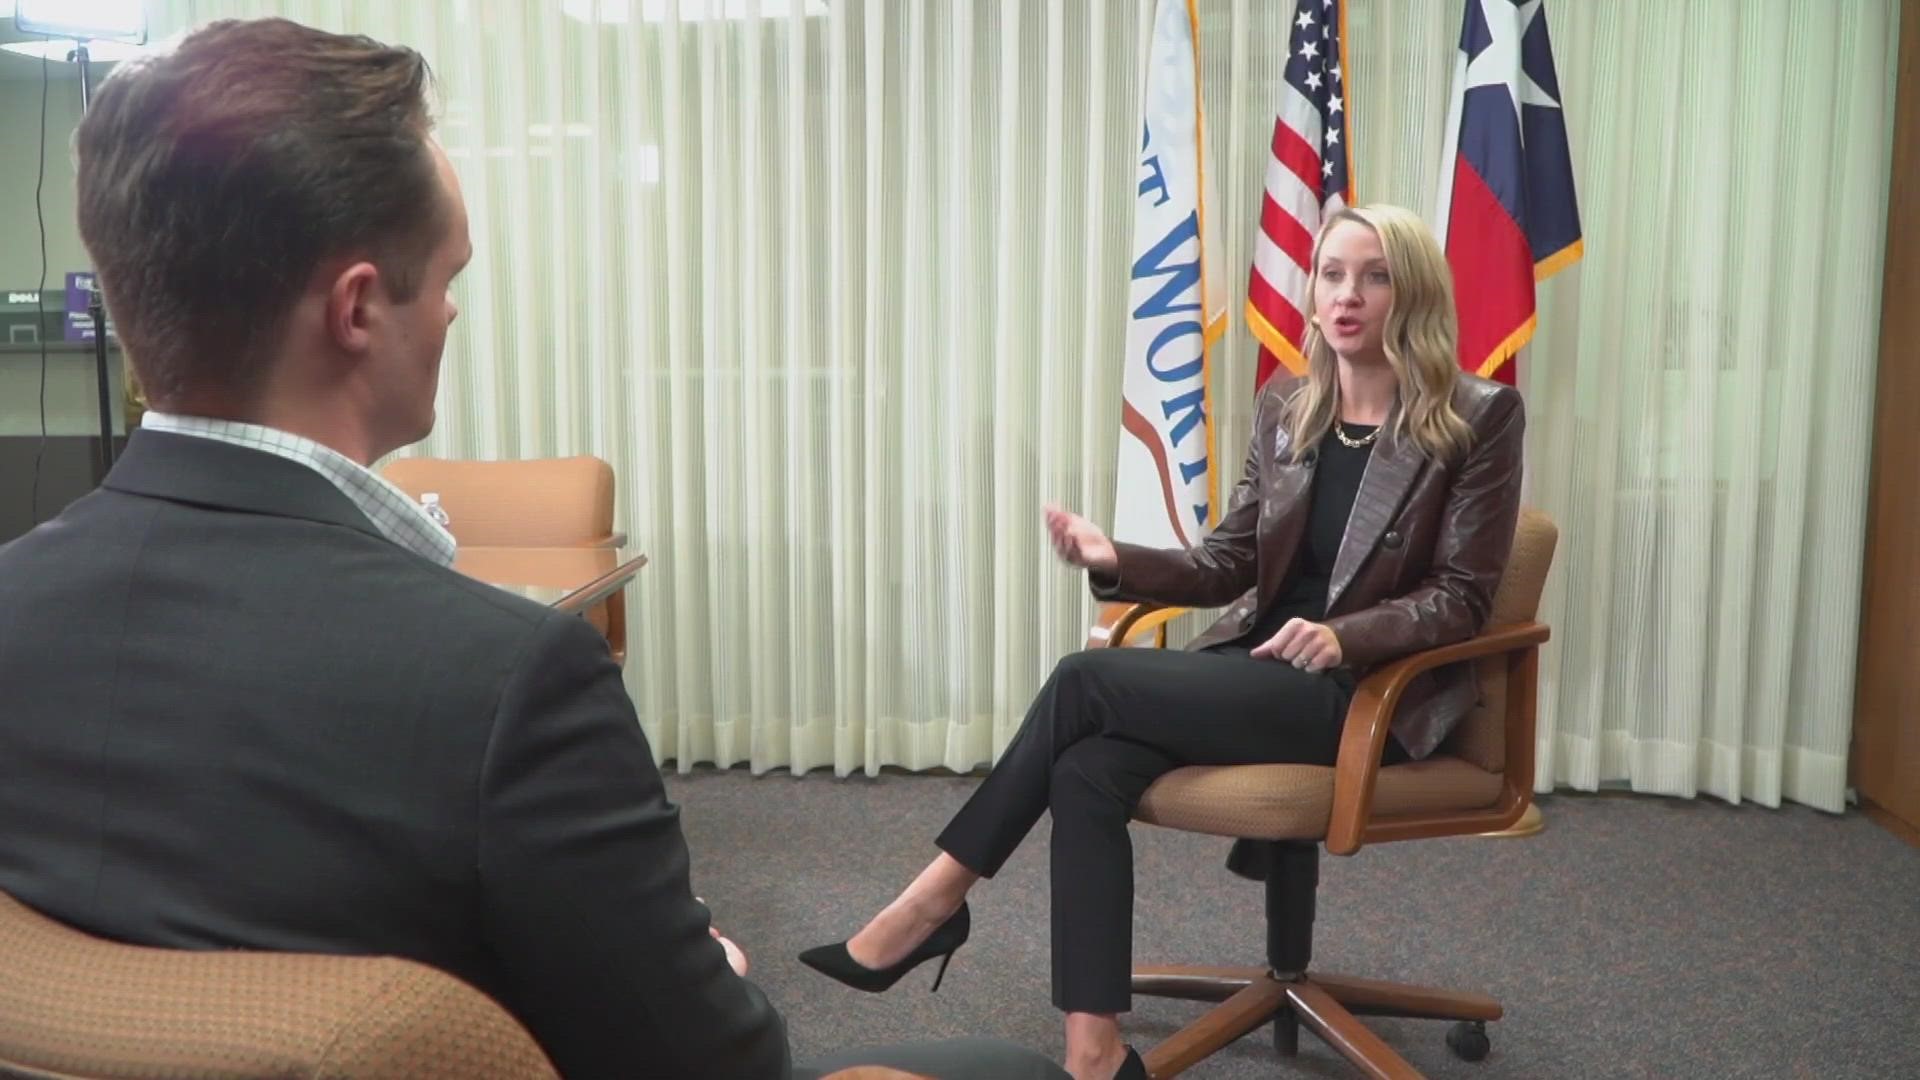 Fort Worth Mayor Mattie Parker sat down with WFAA to discuss the citizen review board, race and policing in the city and her reaction to the Dean trial.